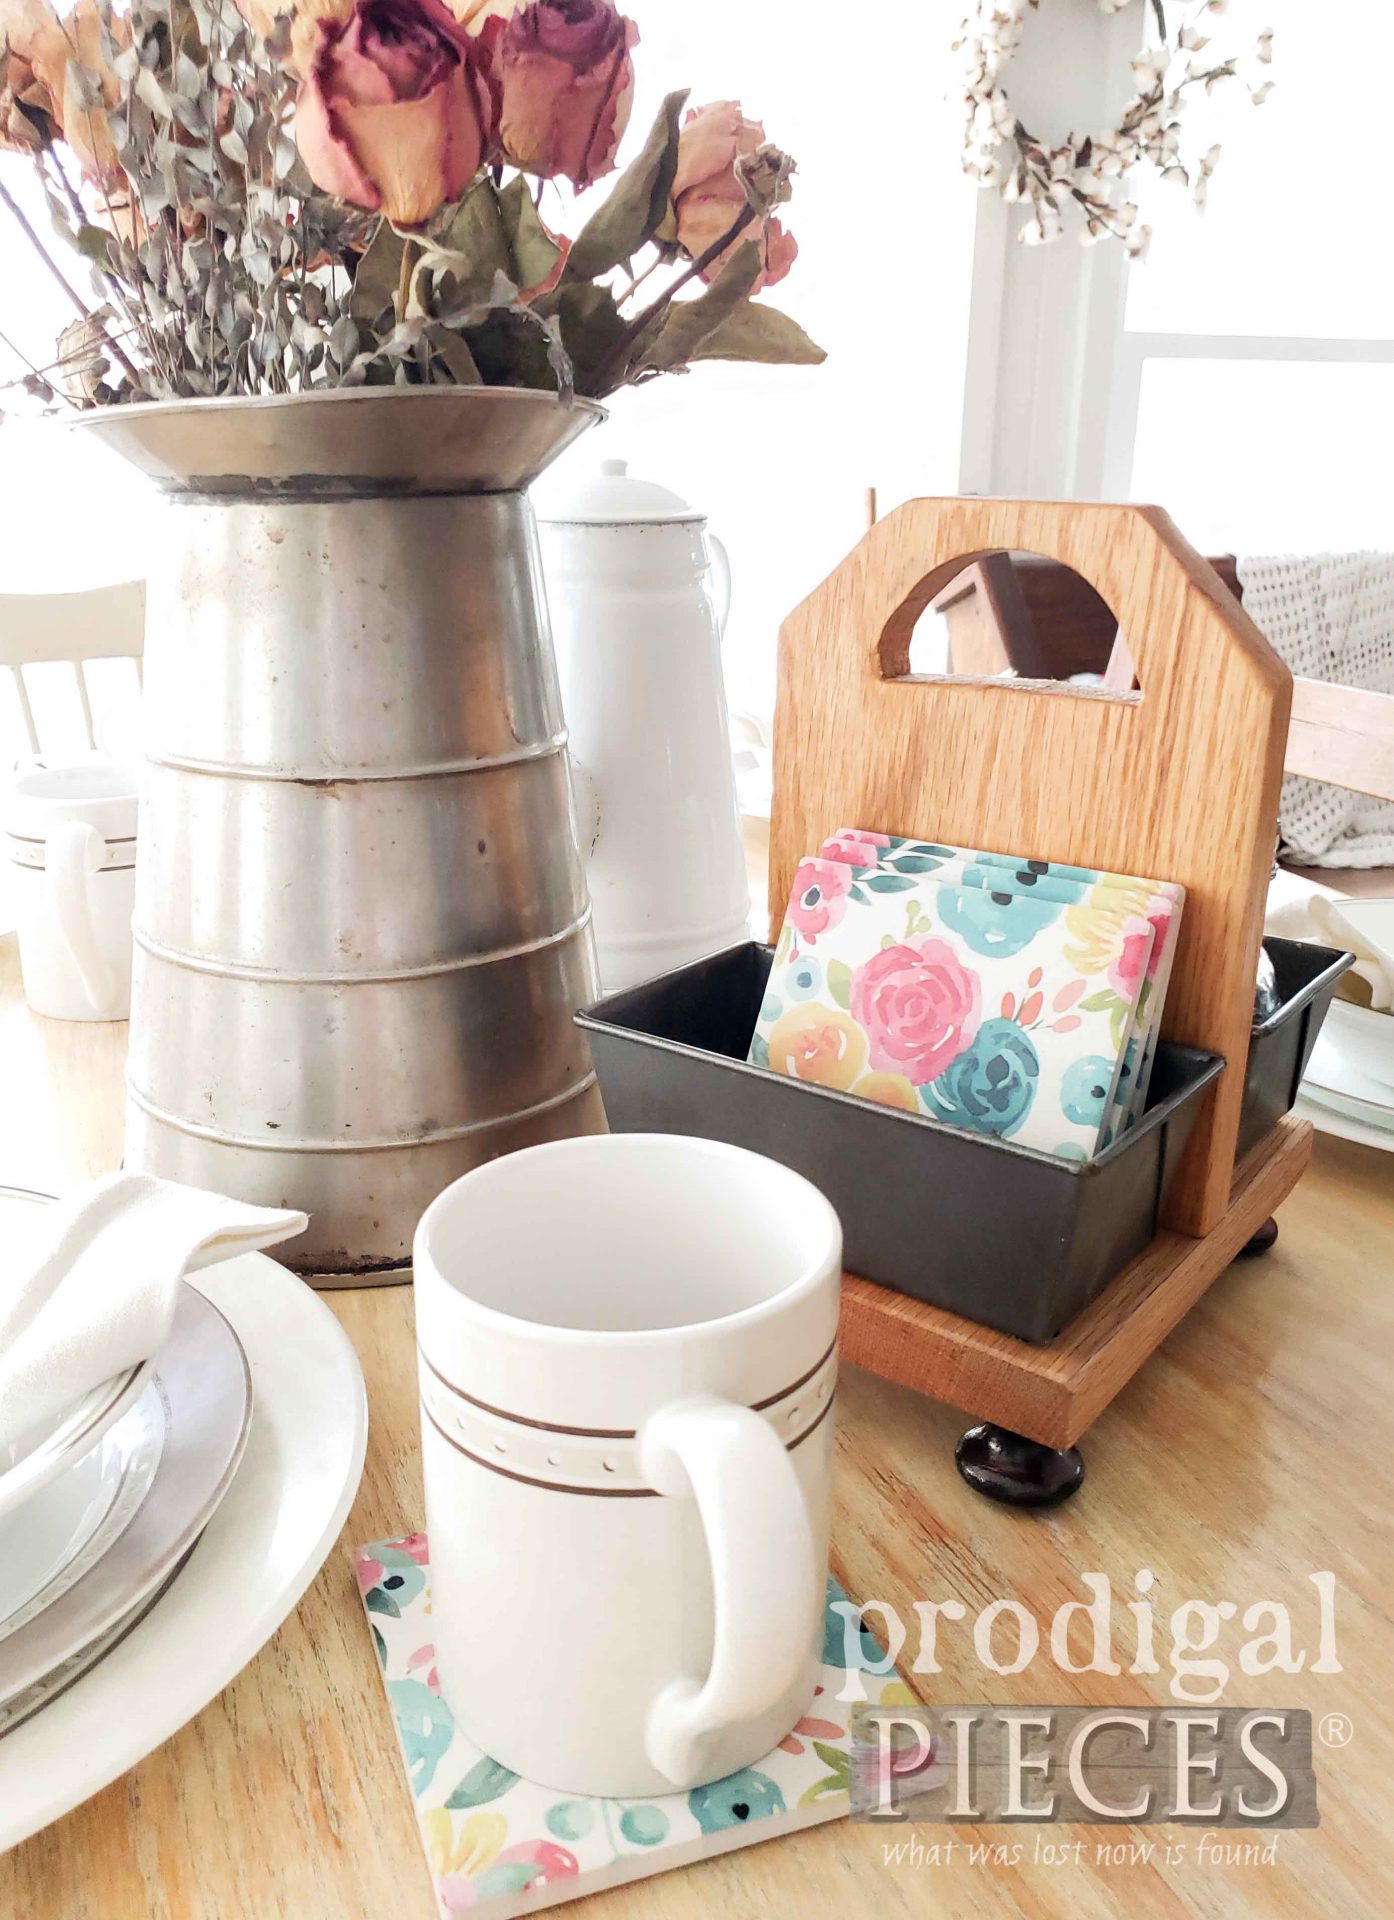 Cottage Style Table Setting with Upcycled Bread Pan Caddy by Larissa of Prodigal Pieces | prodigalpieces.com #prodigalpieces #diy #home #homedecor